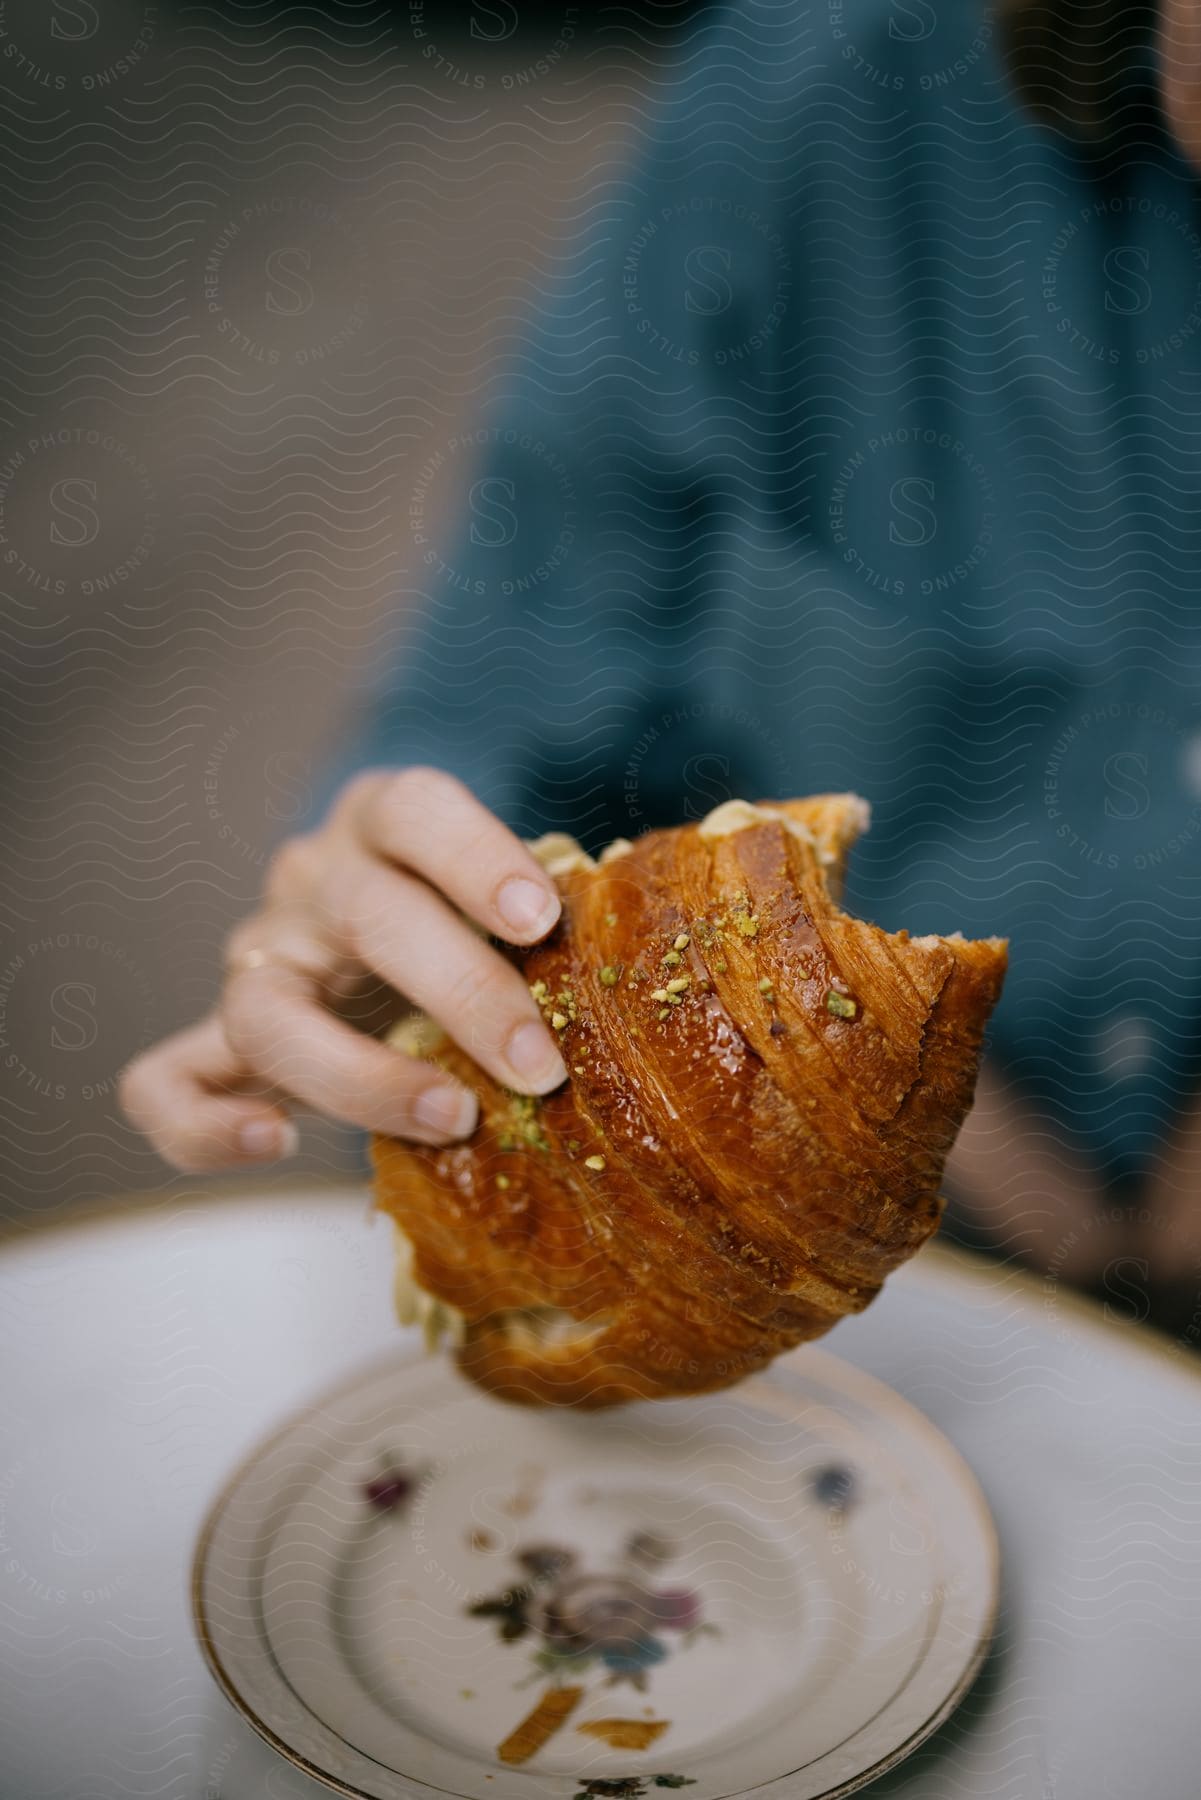 A women is sitting at a table eating a croissant.